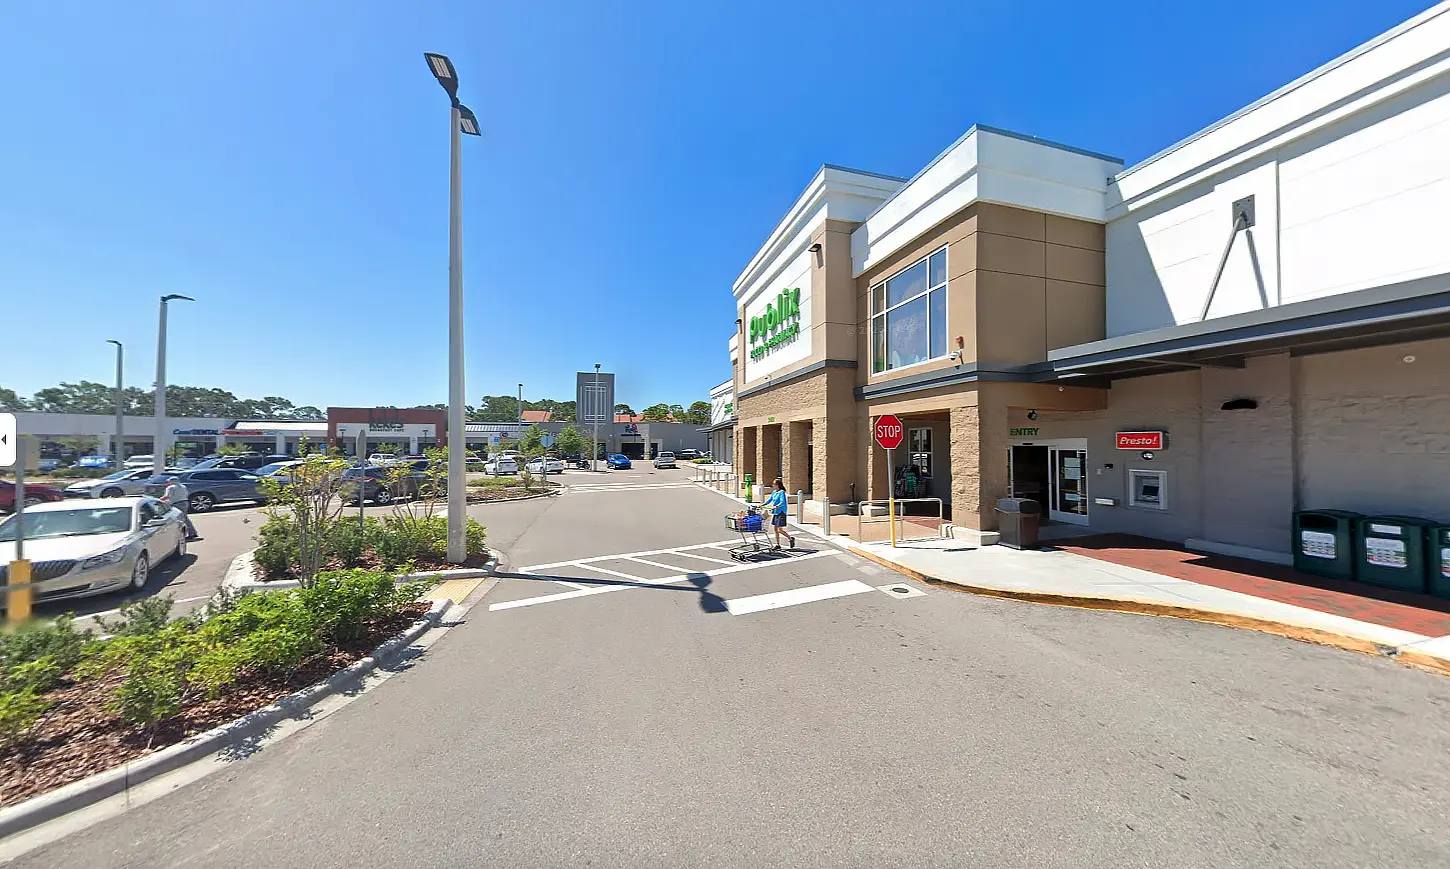 The location of Apex's environmental support site, an open-air shopping plaza and the front view of a grocery store.